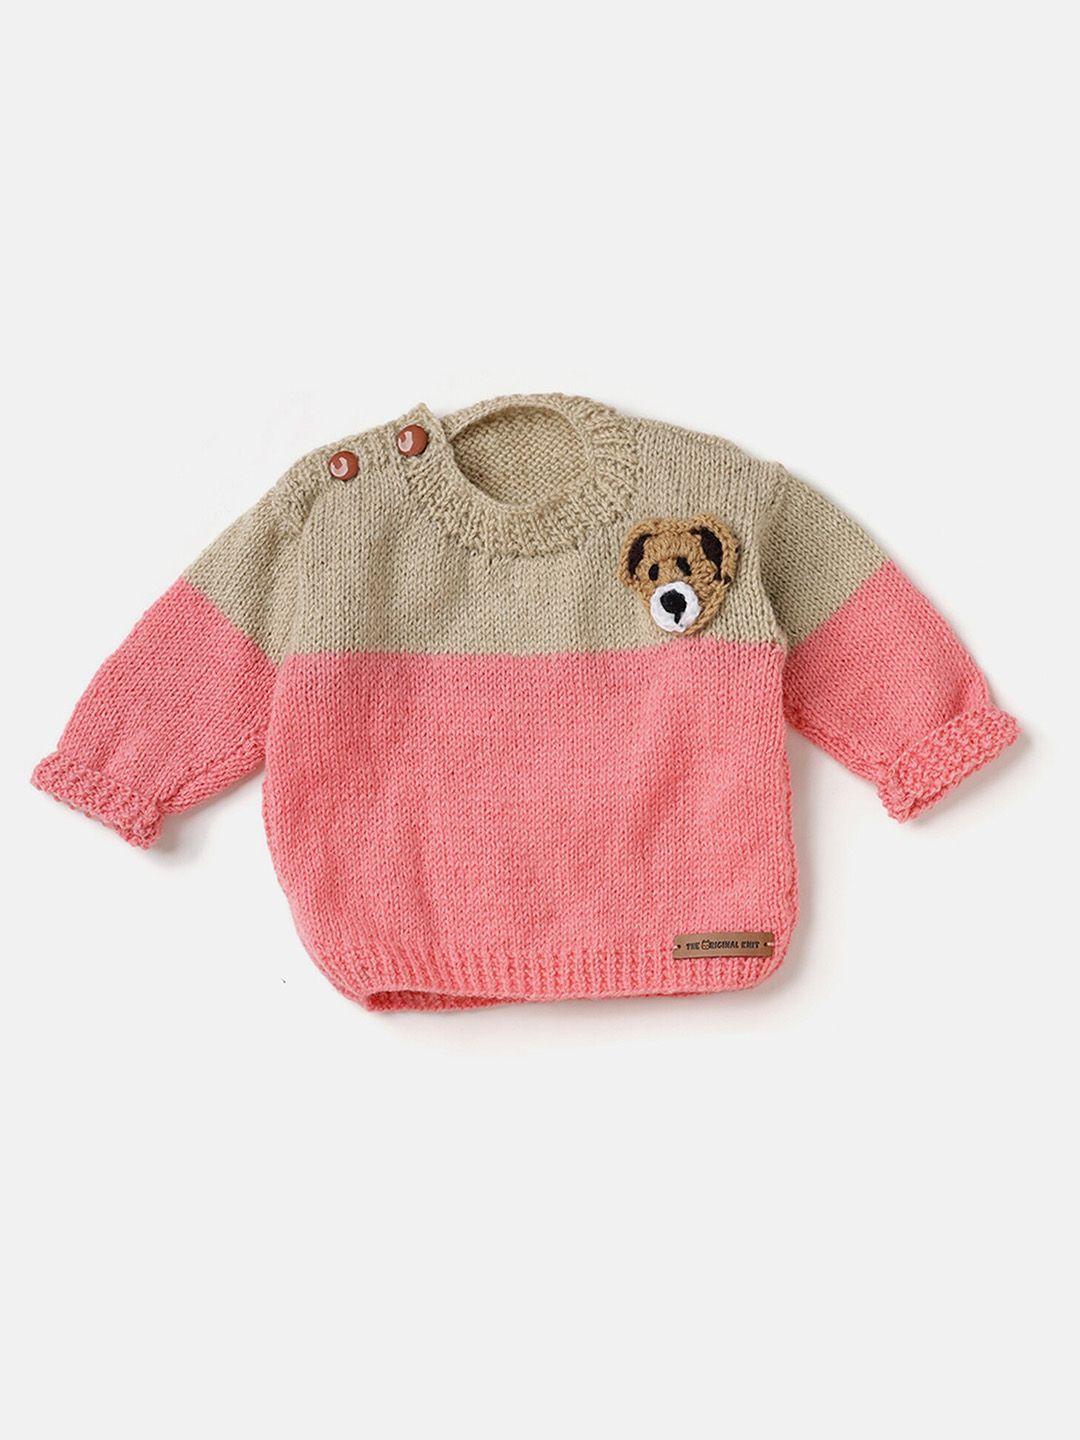 the original knit unisex kids pink & khaki colourblocked pullover with embroidered detail